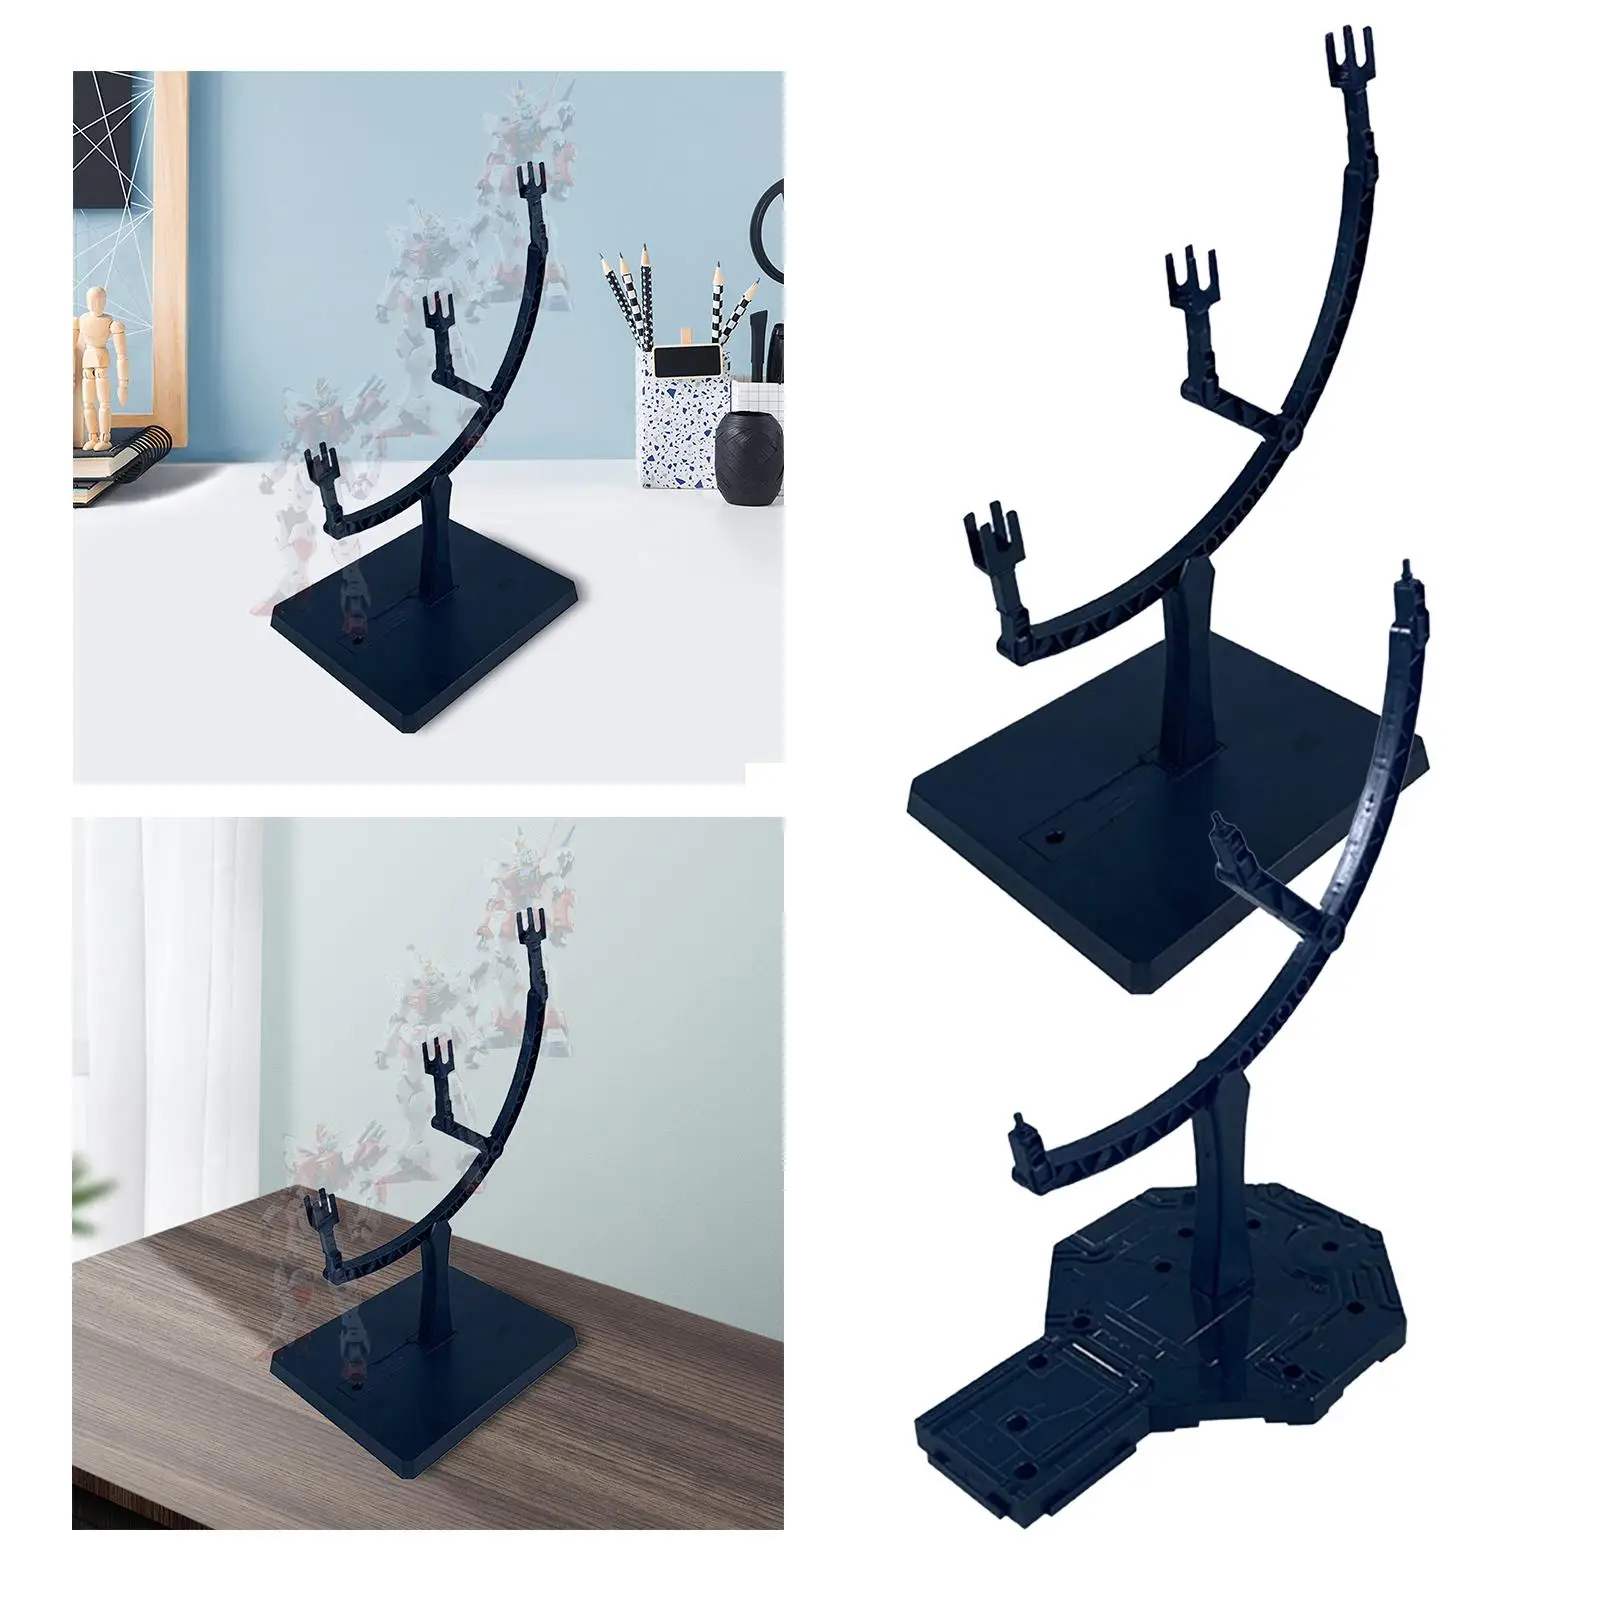 Action Figure Stand Figure Support Base Rack for Tabletop Bedroom Ornament